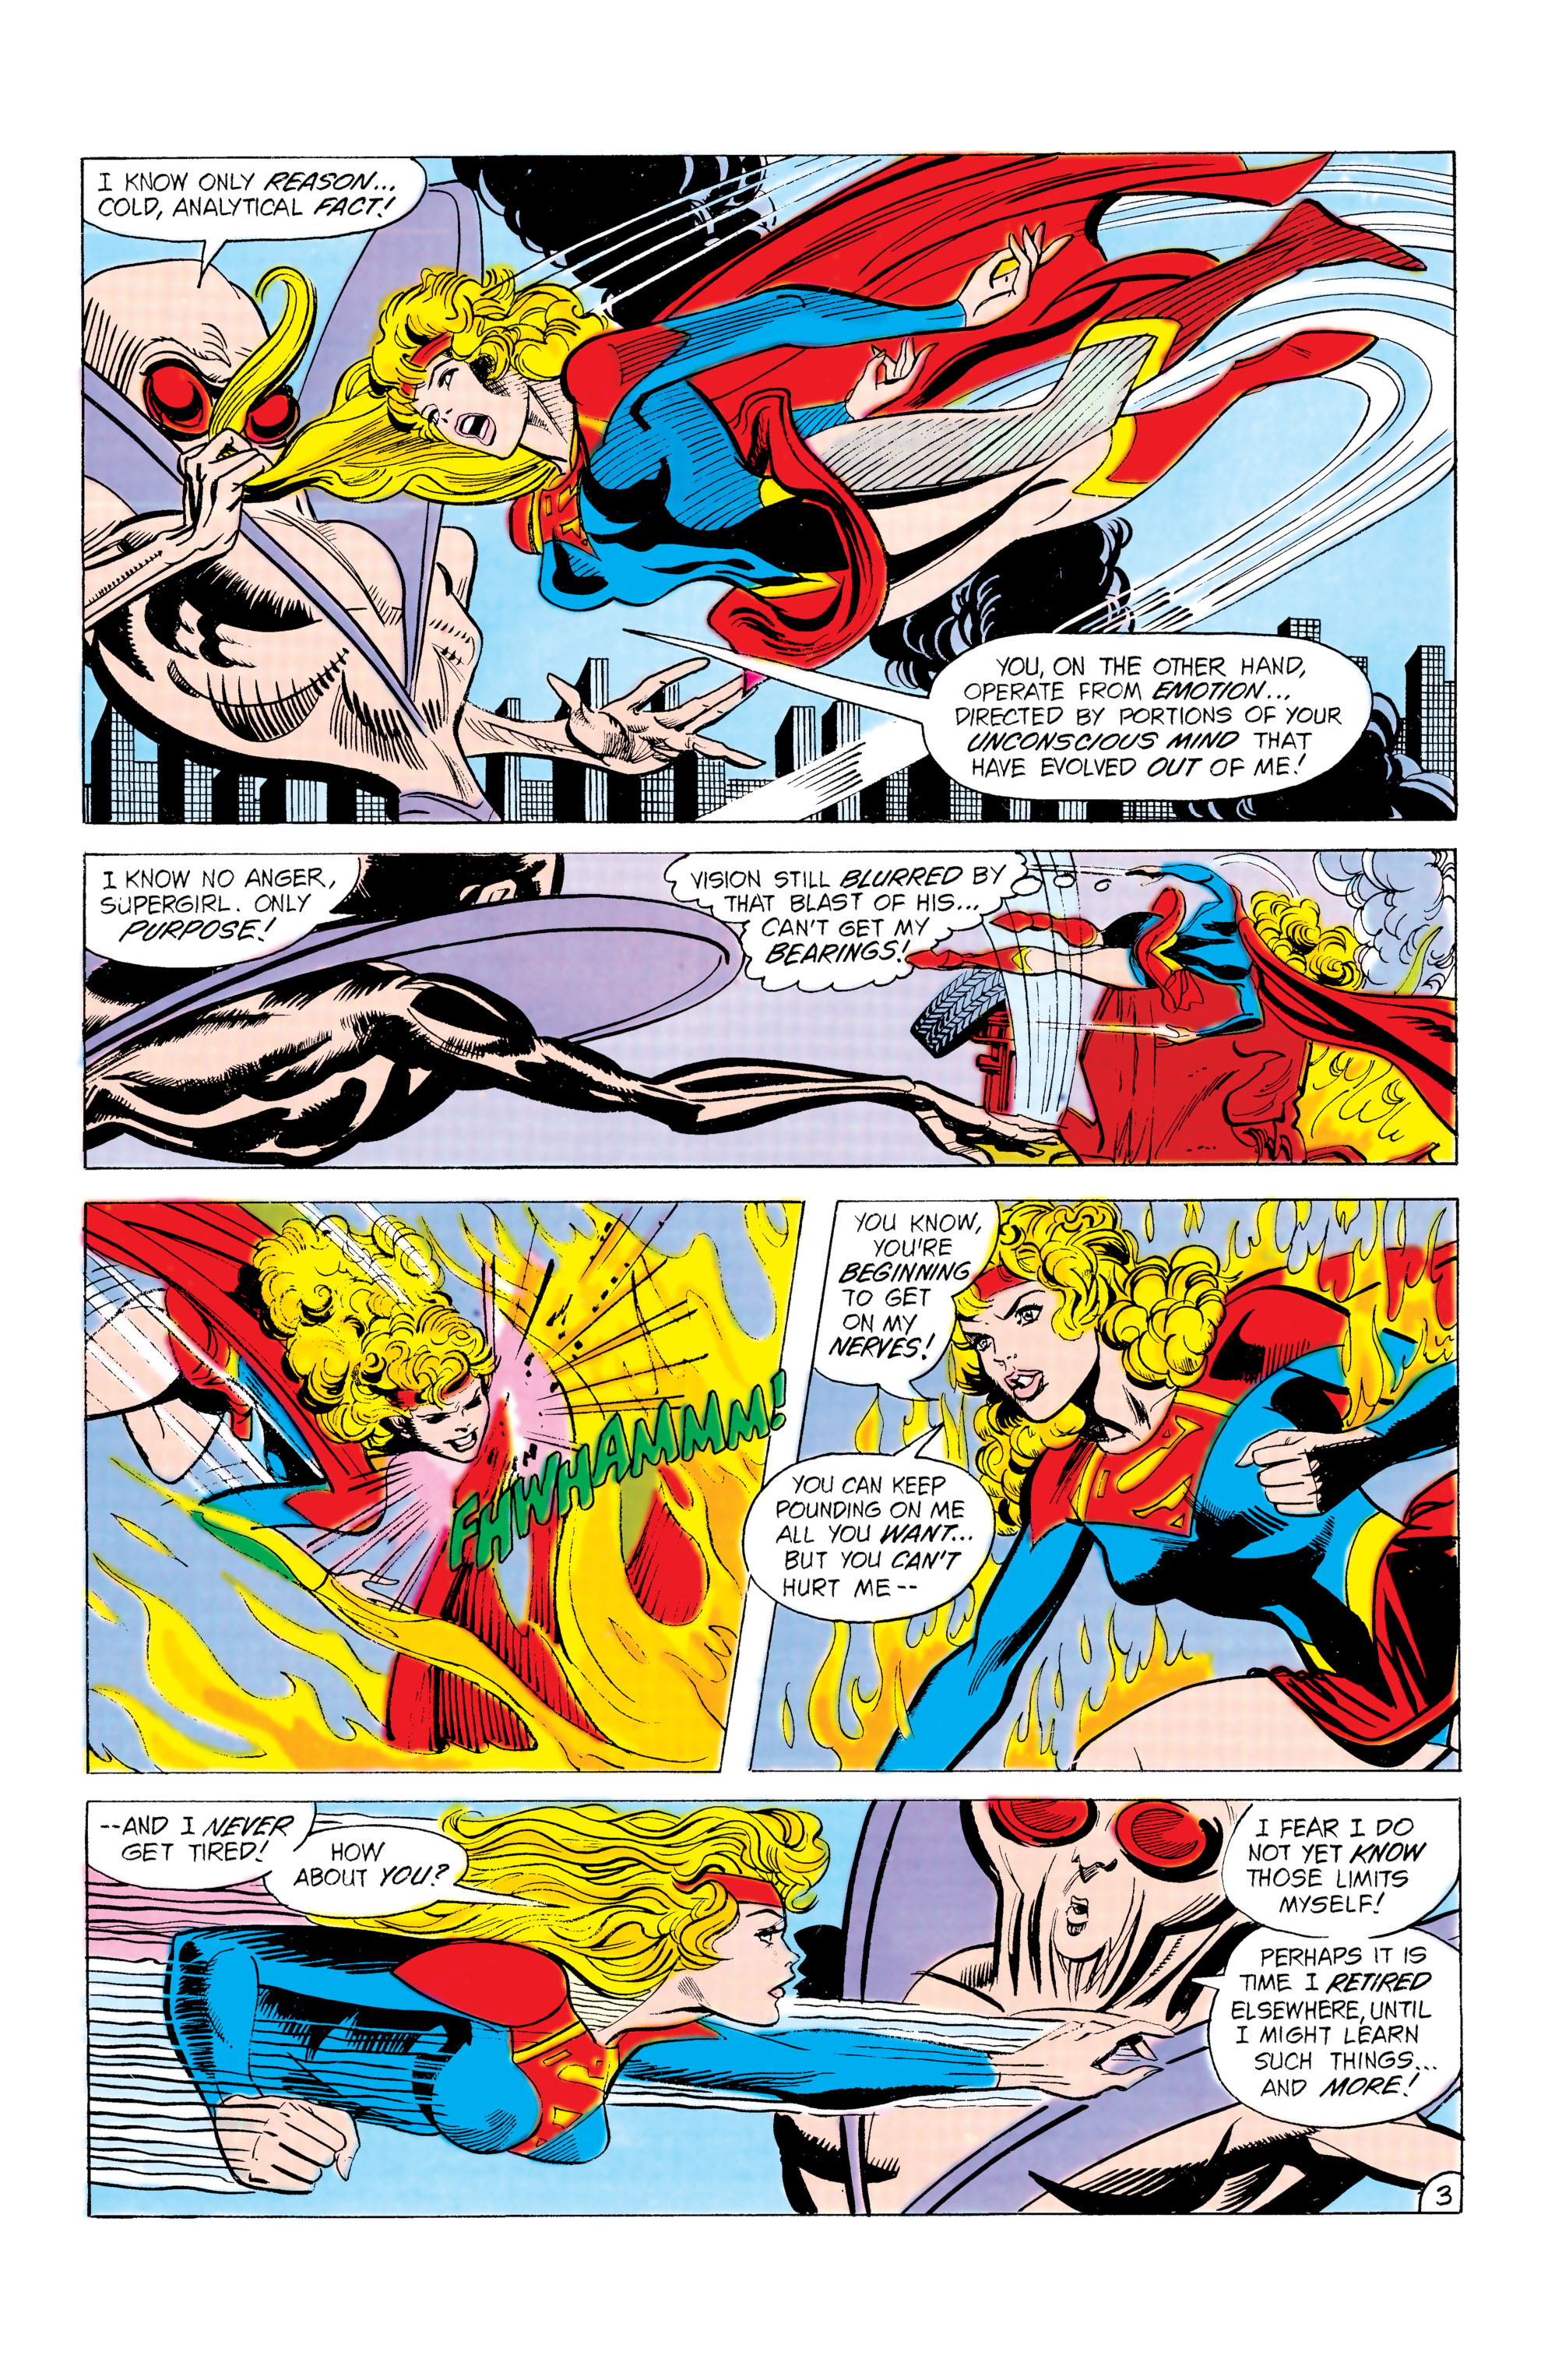 Supergirl (1982) 23 Page 3